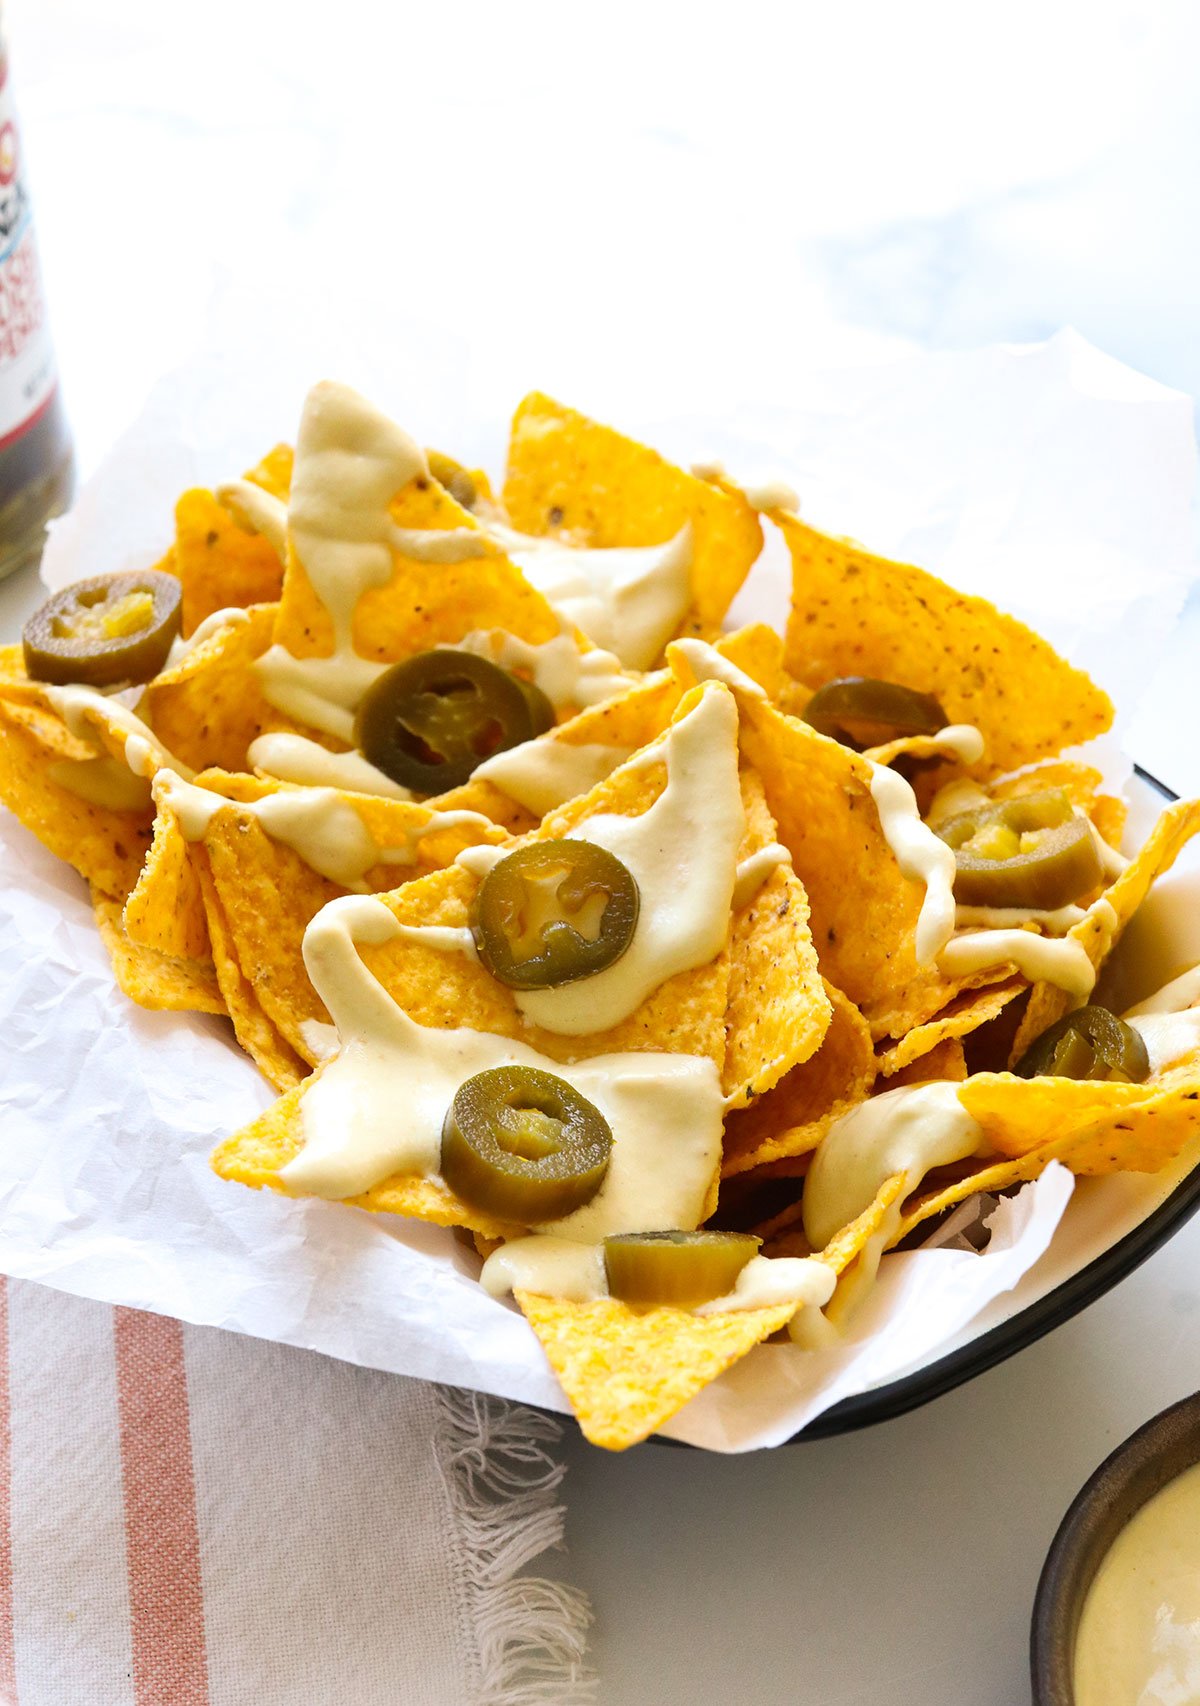 vegan nacho cheese served on tortilla chips with jalapenos.